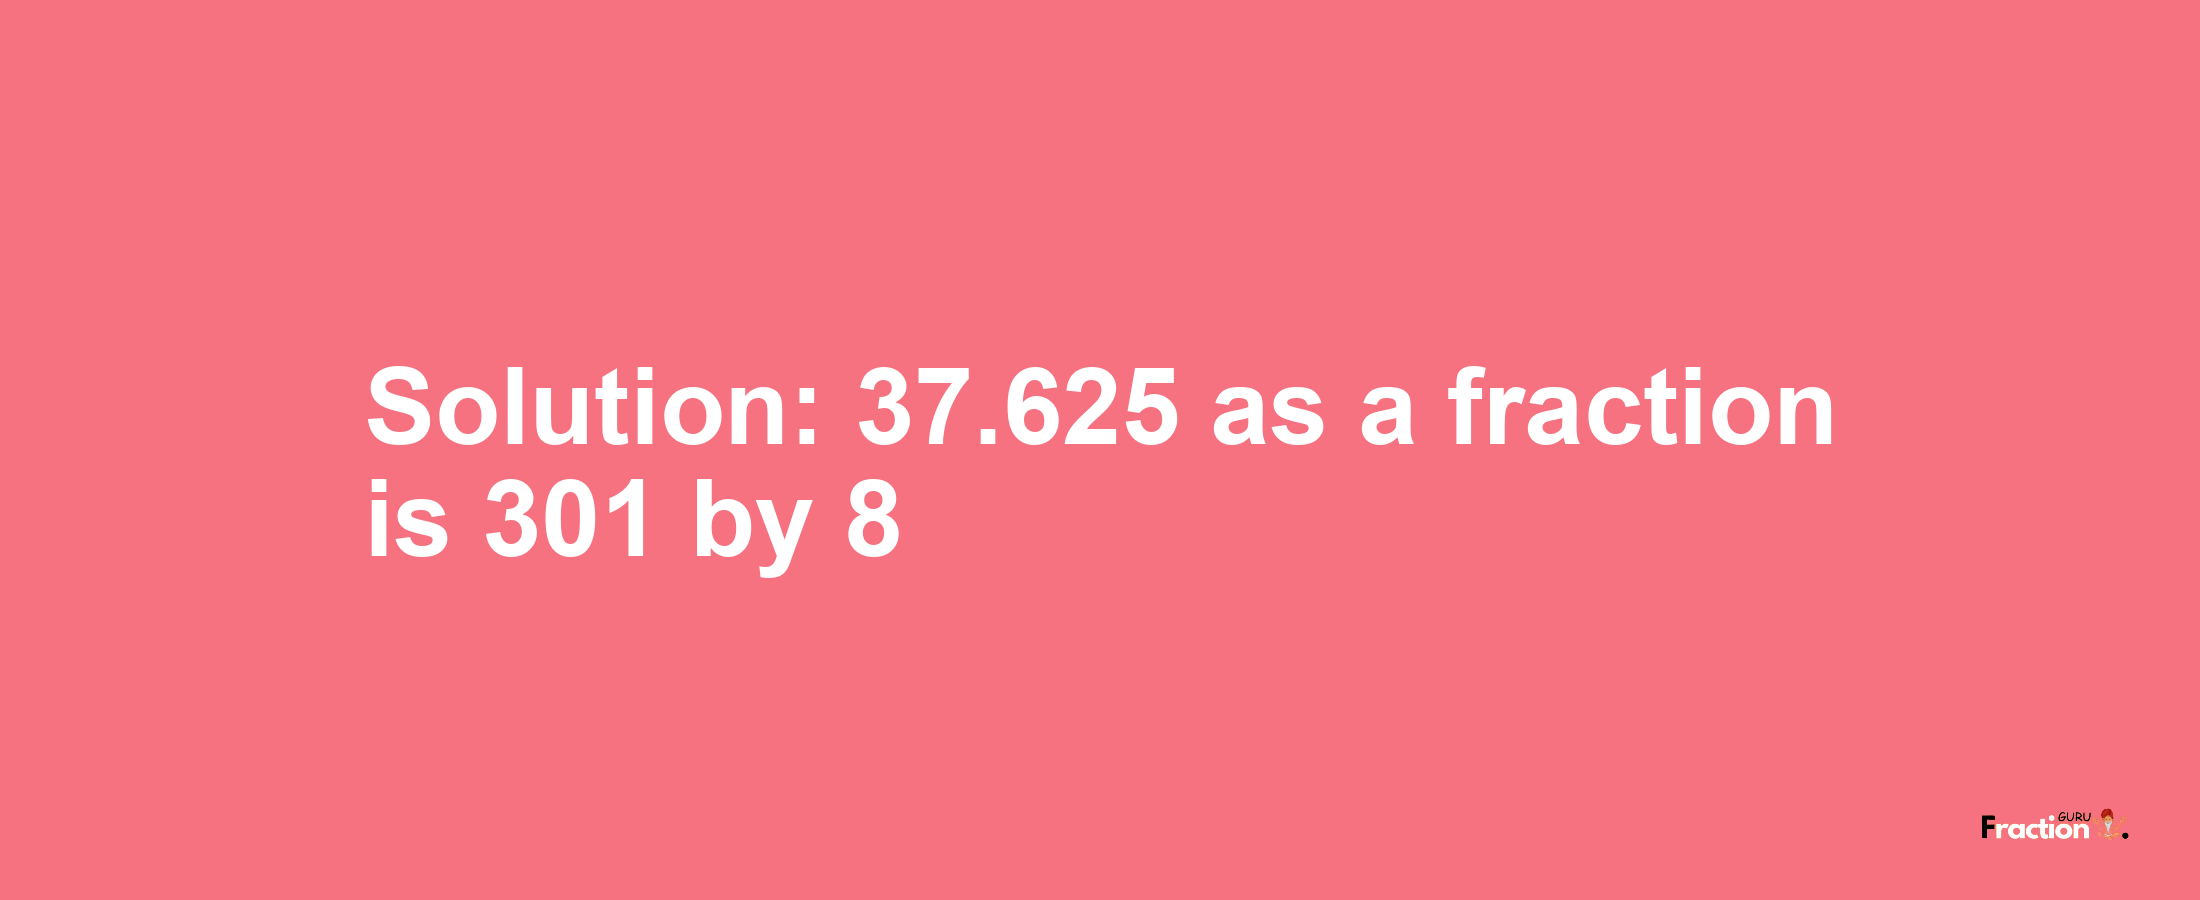 Solution:37.625 as a fraction is 301/8